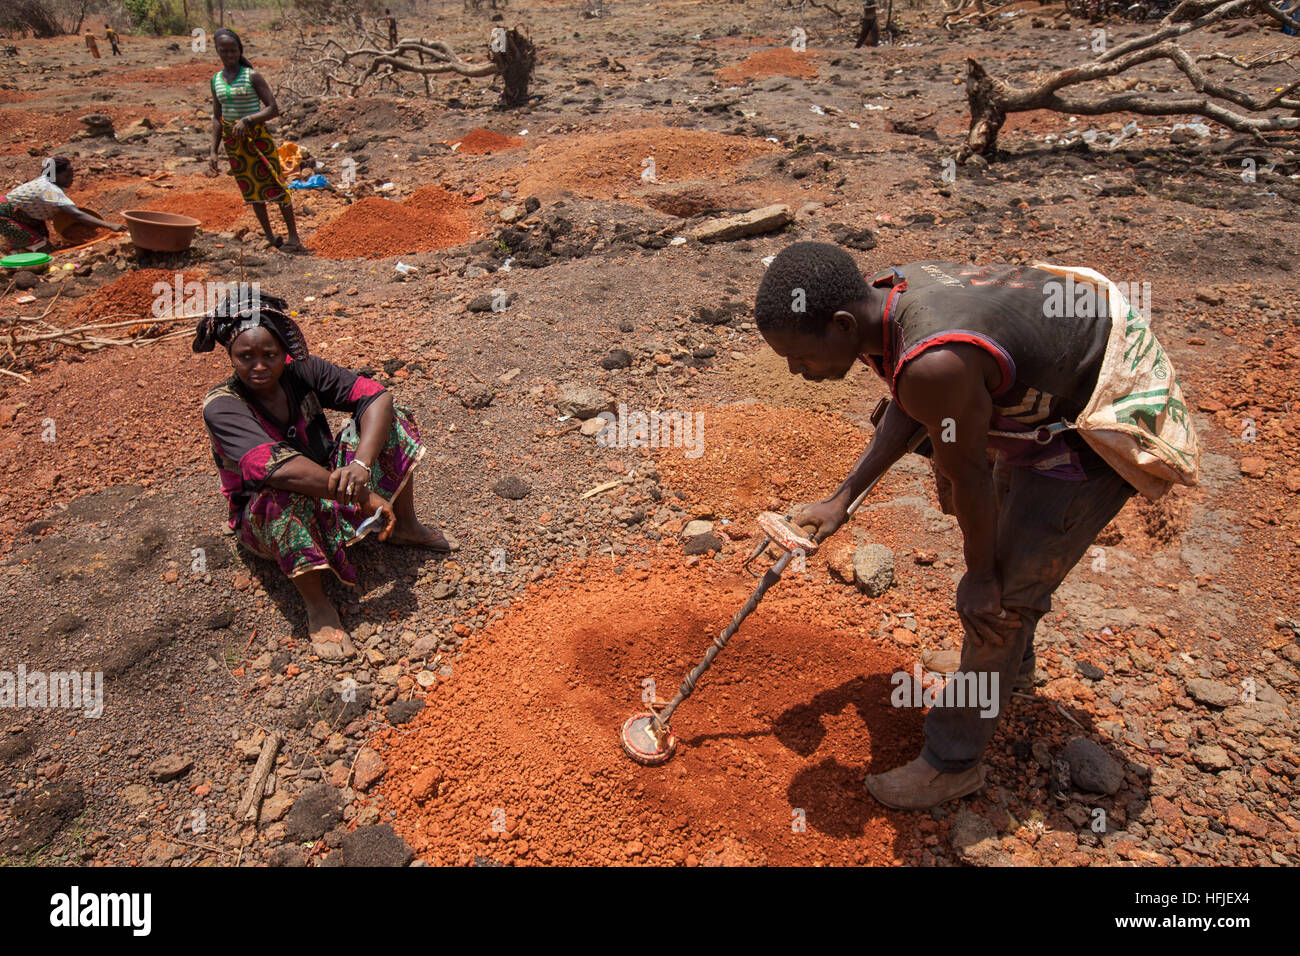 Sanana mine, Guinea, 2nd May 2015; Sanana mines, 12 km from Gbderedou Baranama  village, will be flooded by the Fomi dam.   Woman having low-grade ore checked.  She said the ore has already been checked three times by the miner who found nothing.  If she finds something now she will split it 2/3 to her and 1/3 to the checker. Stock Photo